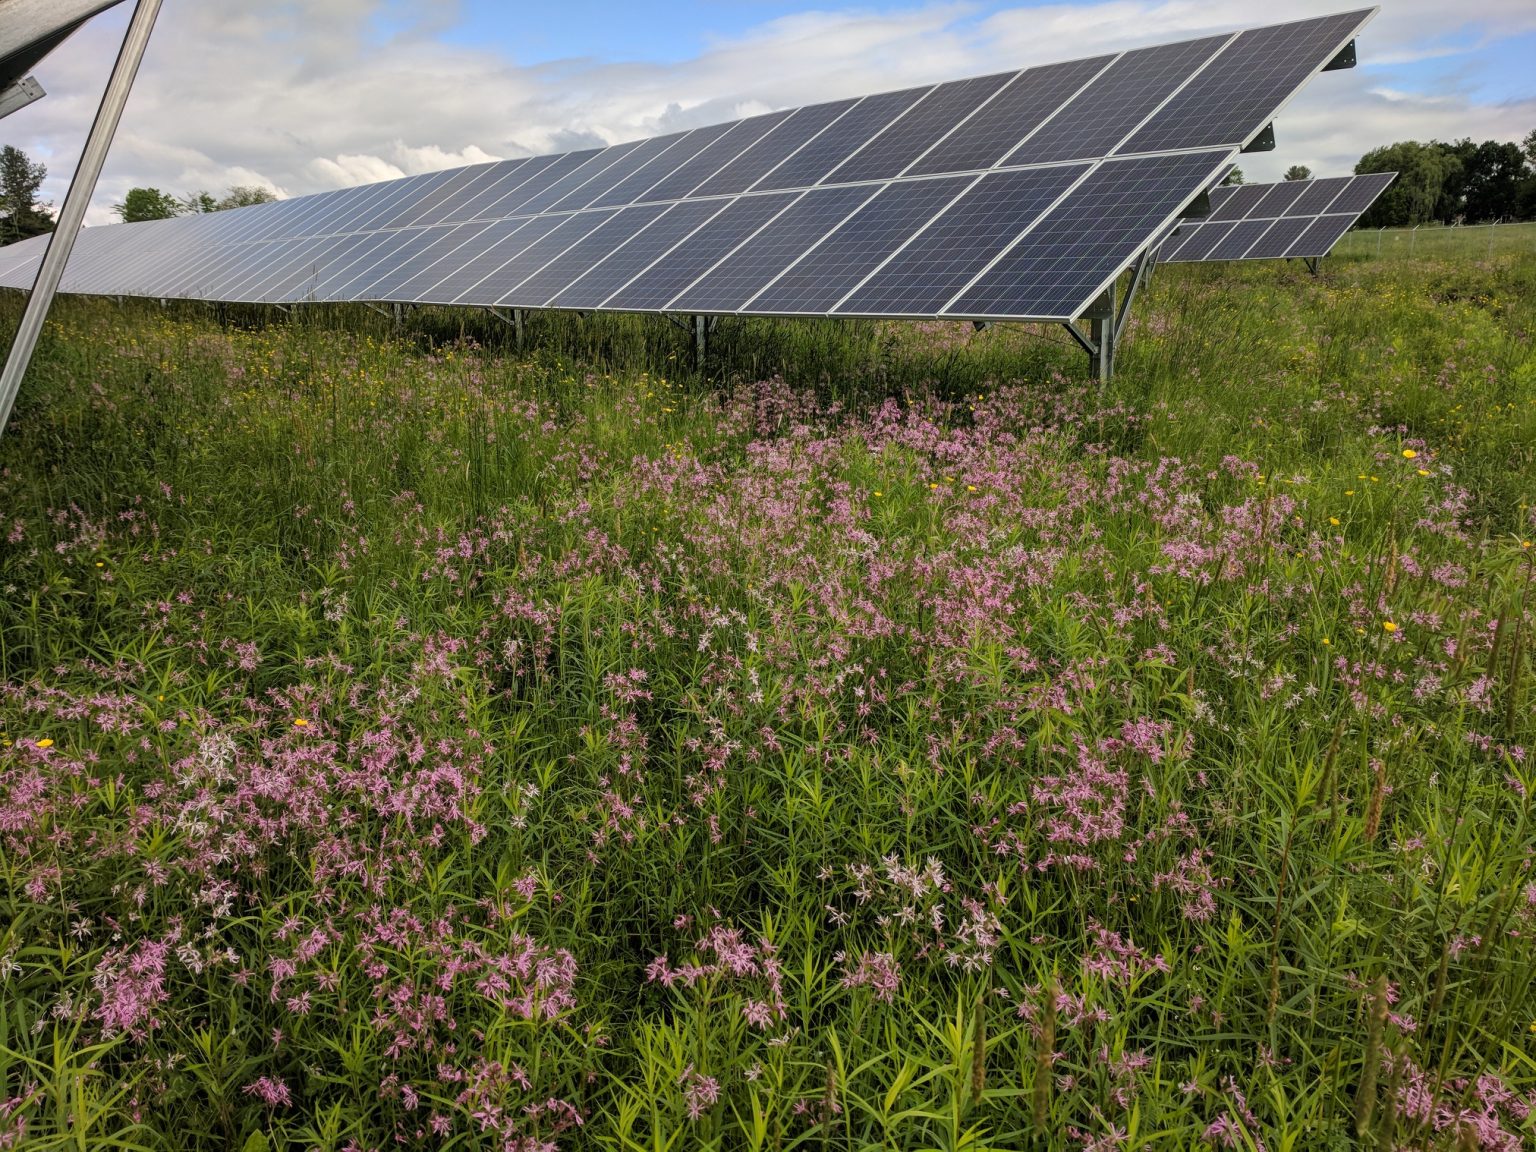 AGRIVOLTAICS: COMBINING AGRICULTURE AND SOLAR POWER